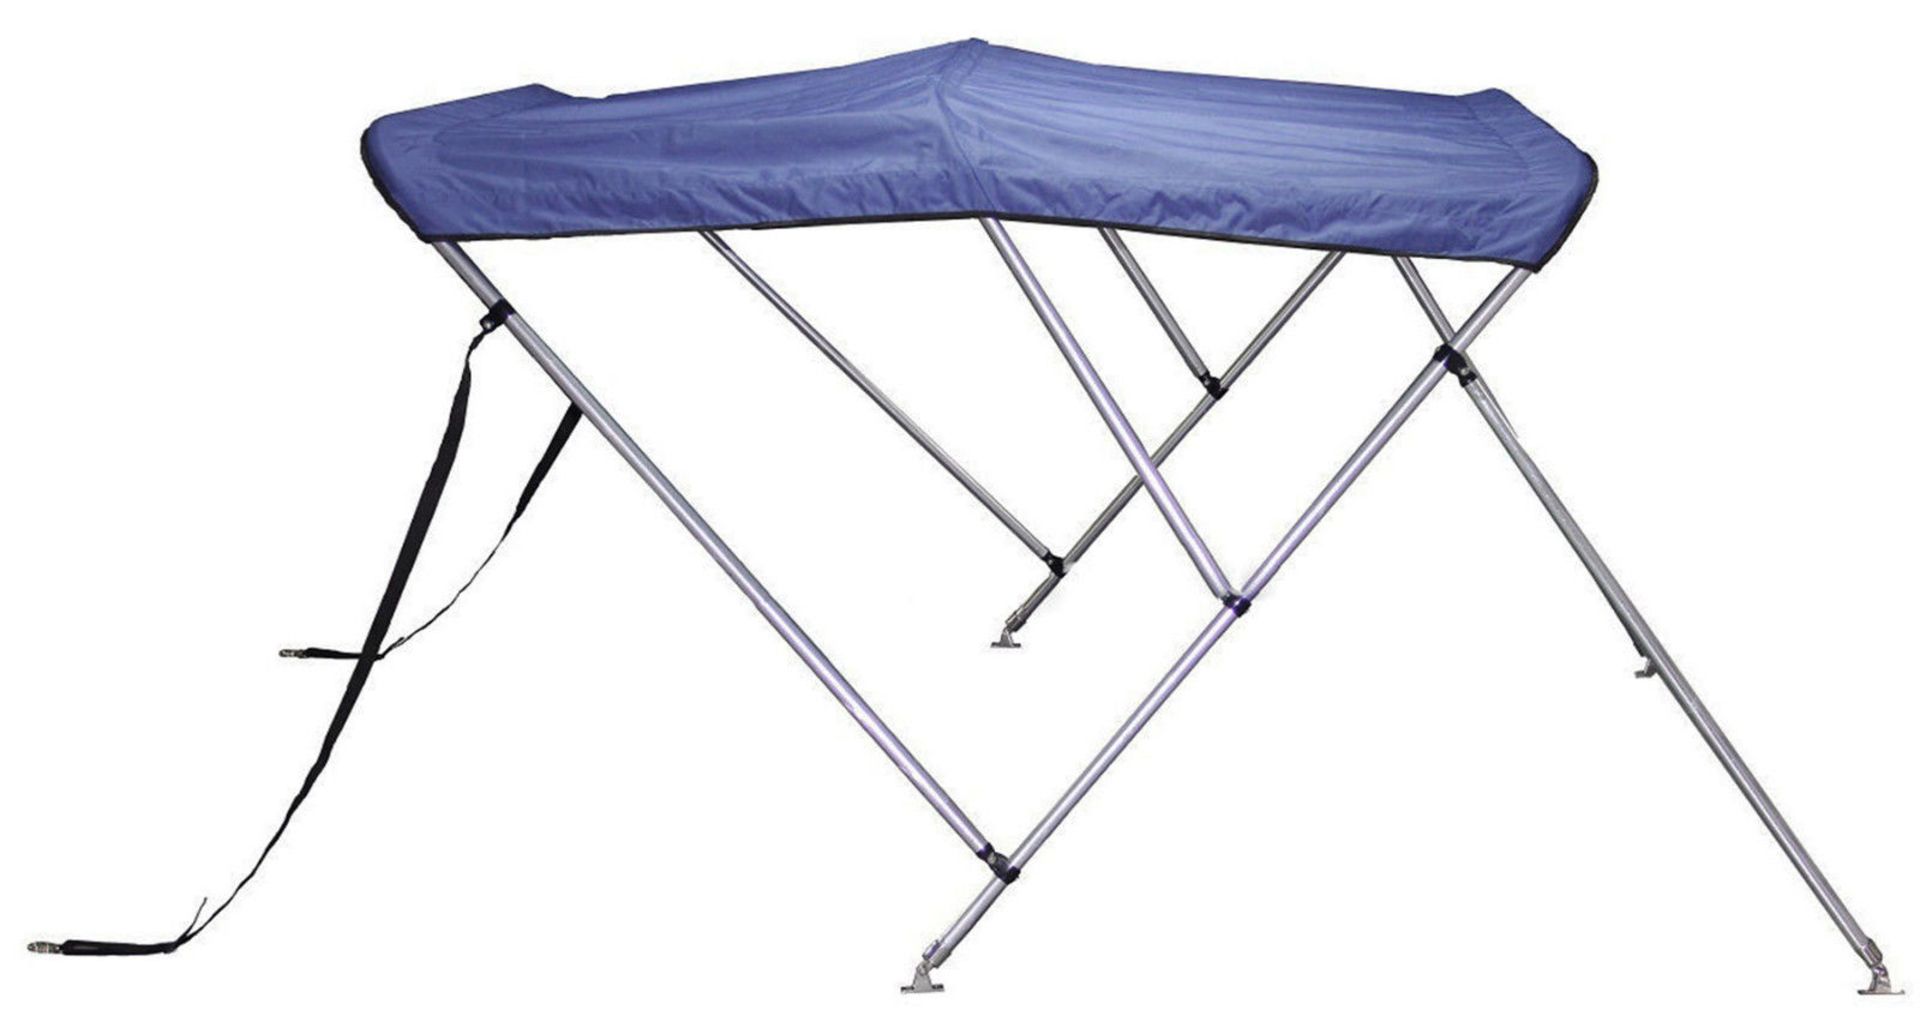 BIMINI TOP CANOPY SHADE - QTY: 1 2 Bow version with aluminium frame and nylon fittings. 600D